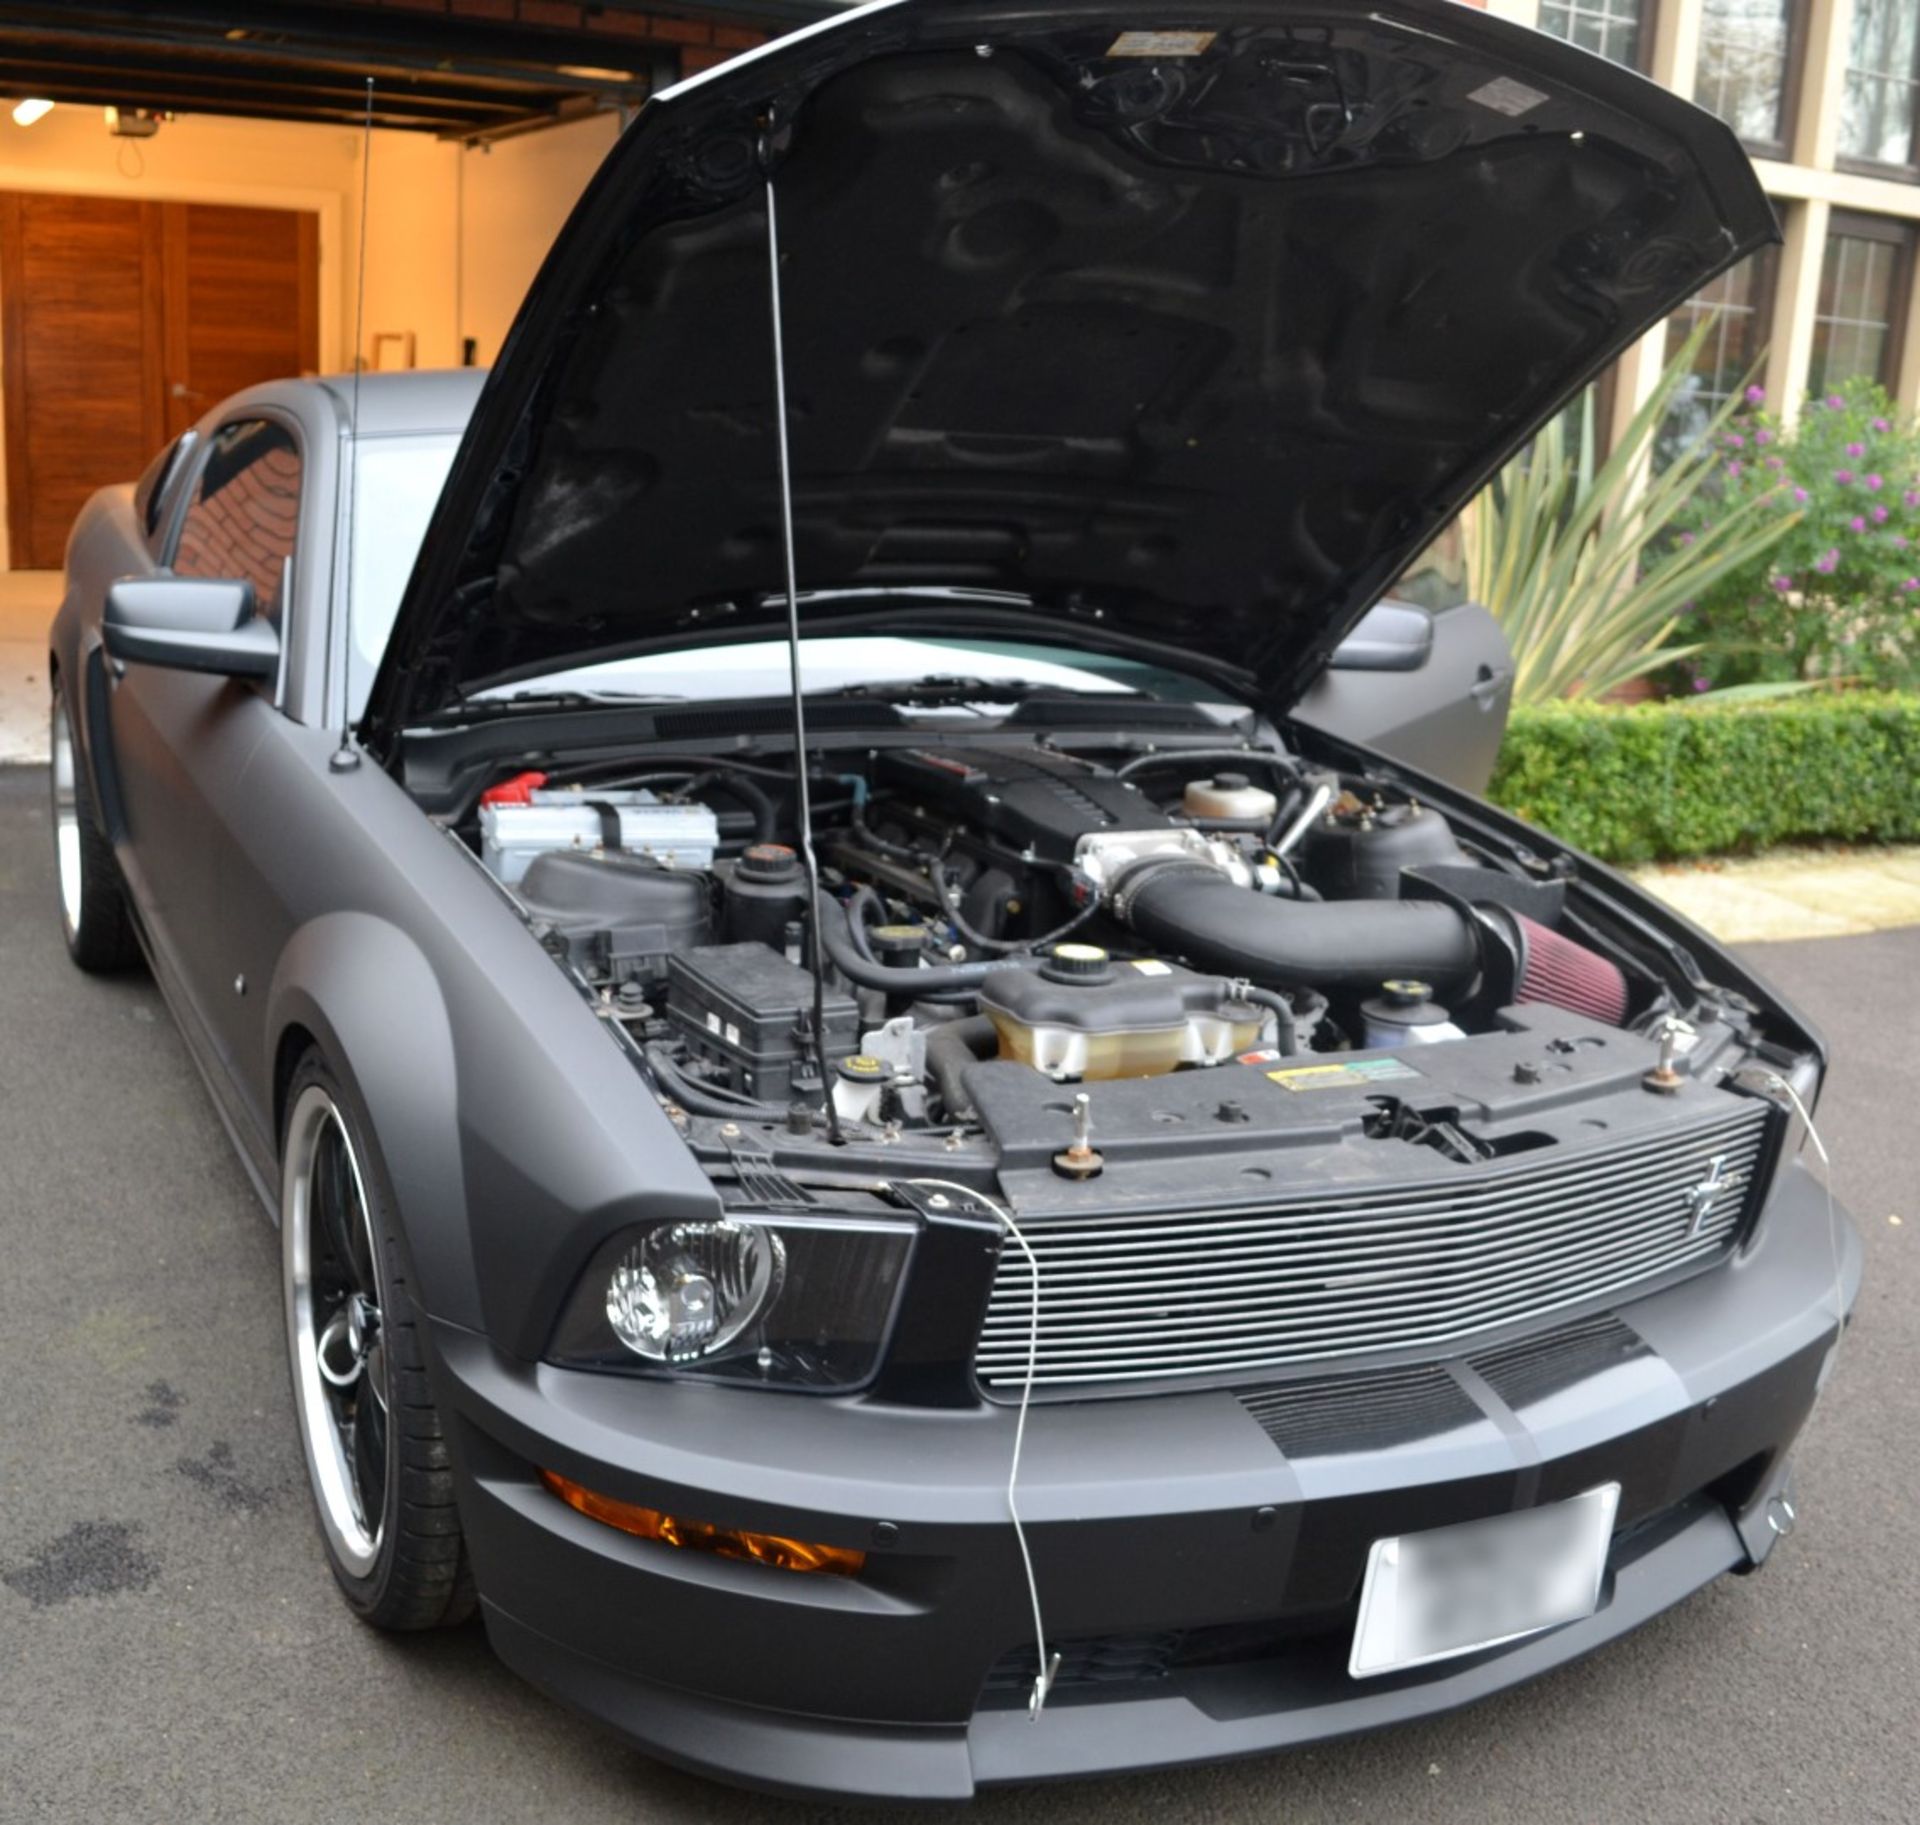 Limited Edition Supercharged 2008 Shelby Ford Mustang GT-C - 2136 Miles - No VAT on the hammer - Image 43 of 64